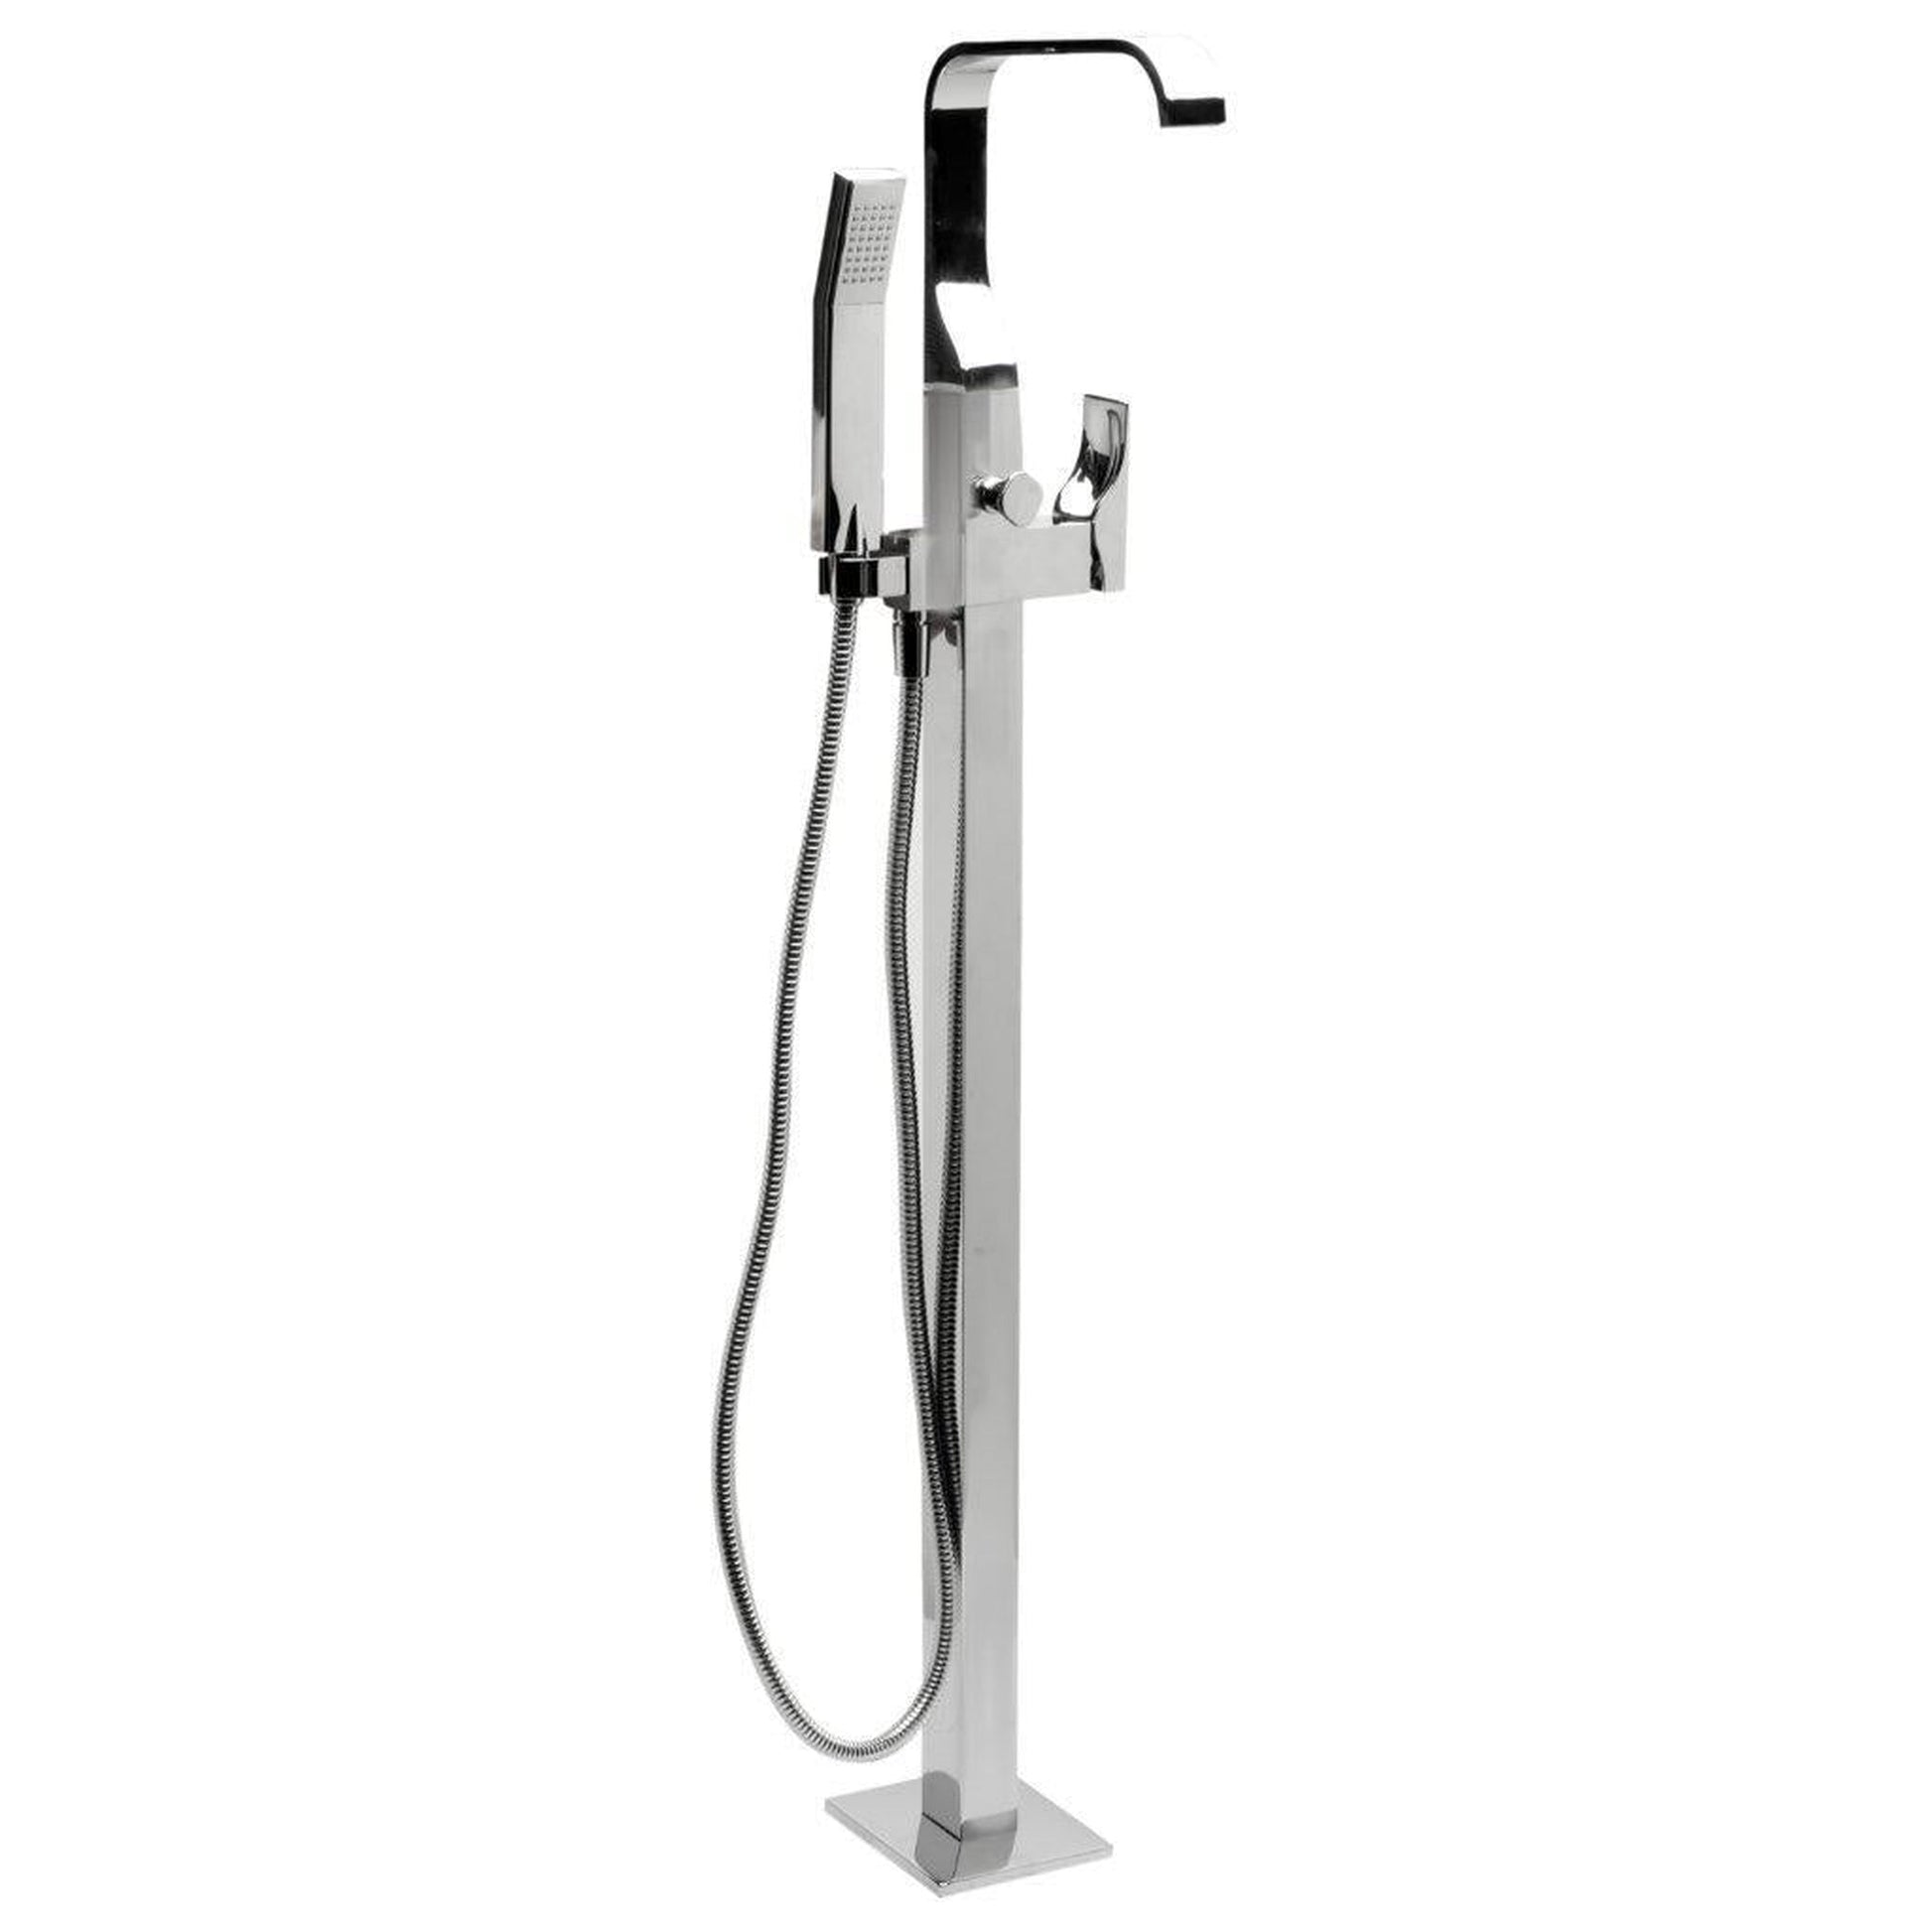 ALFI Brand AB2180-PC Polished Chrome Floor Mounted Tub Filler Mixer With Hand Held Shower Head and Single Lever